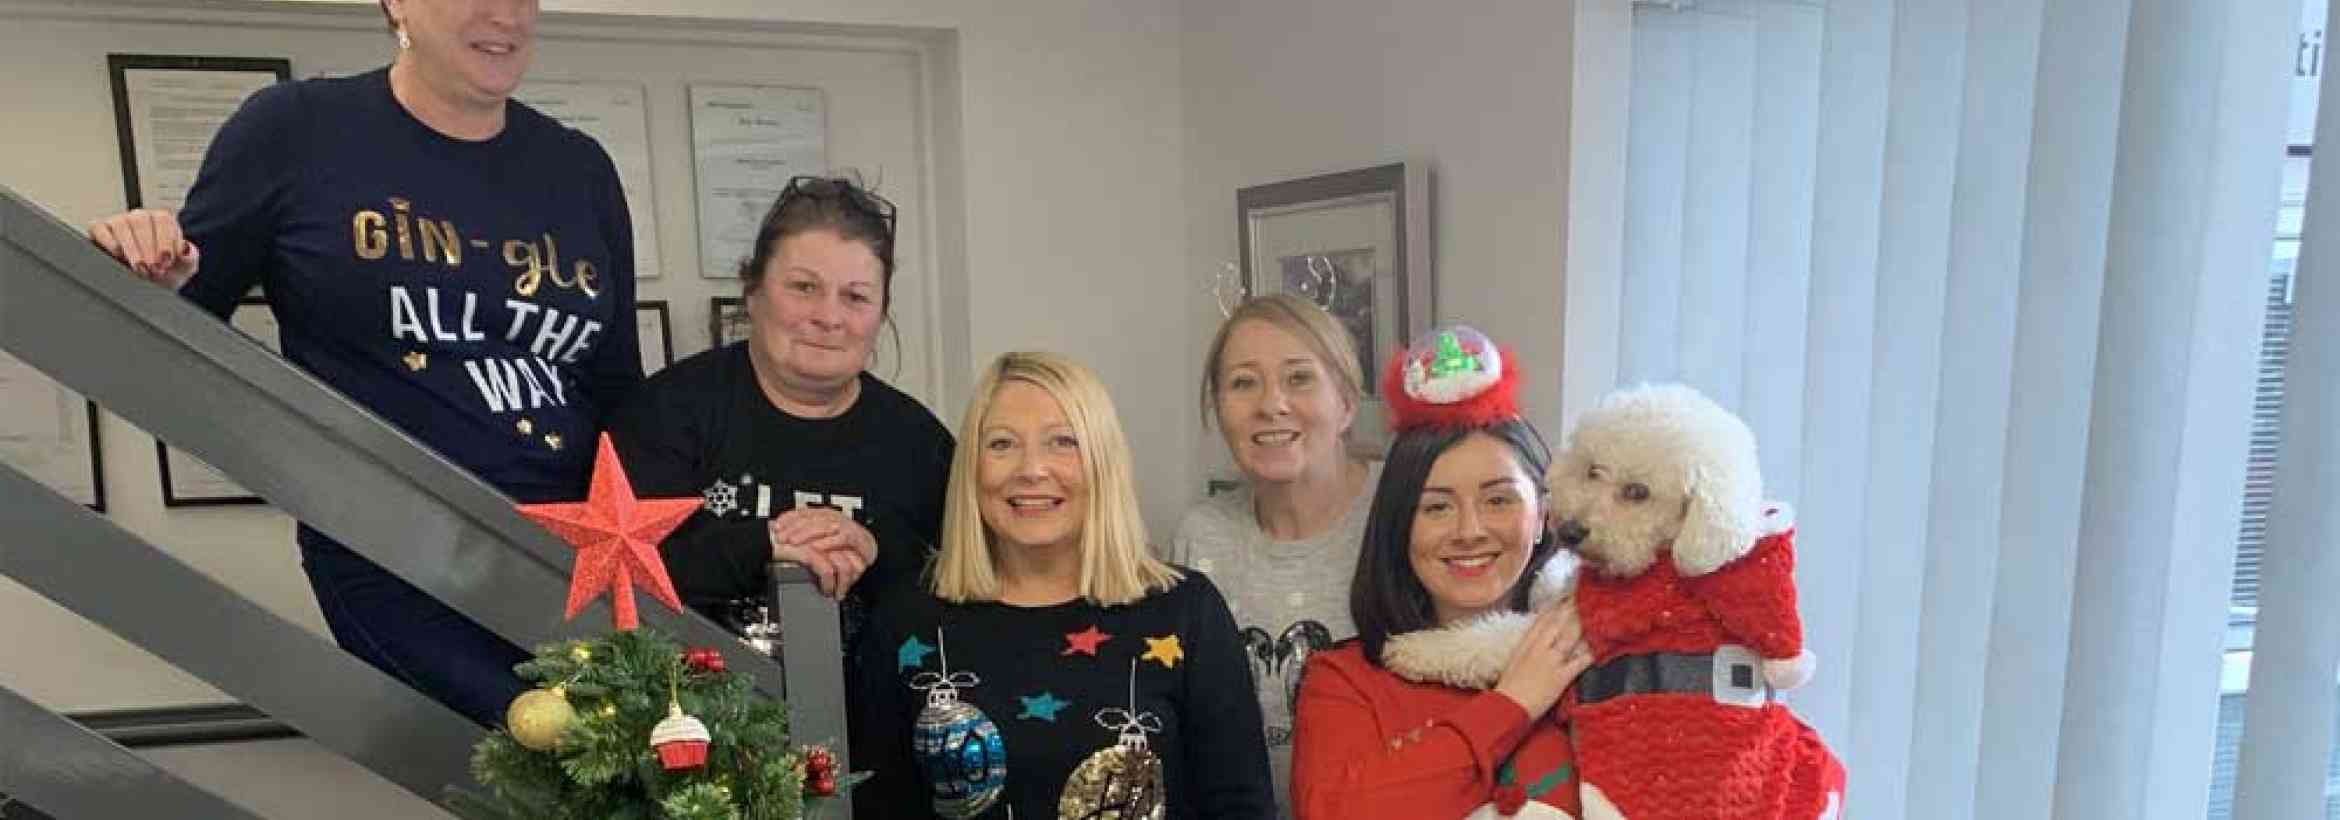 Christmas Jumper Day at Swansea